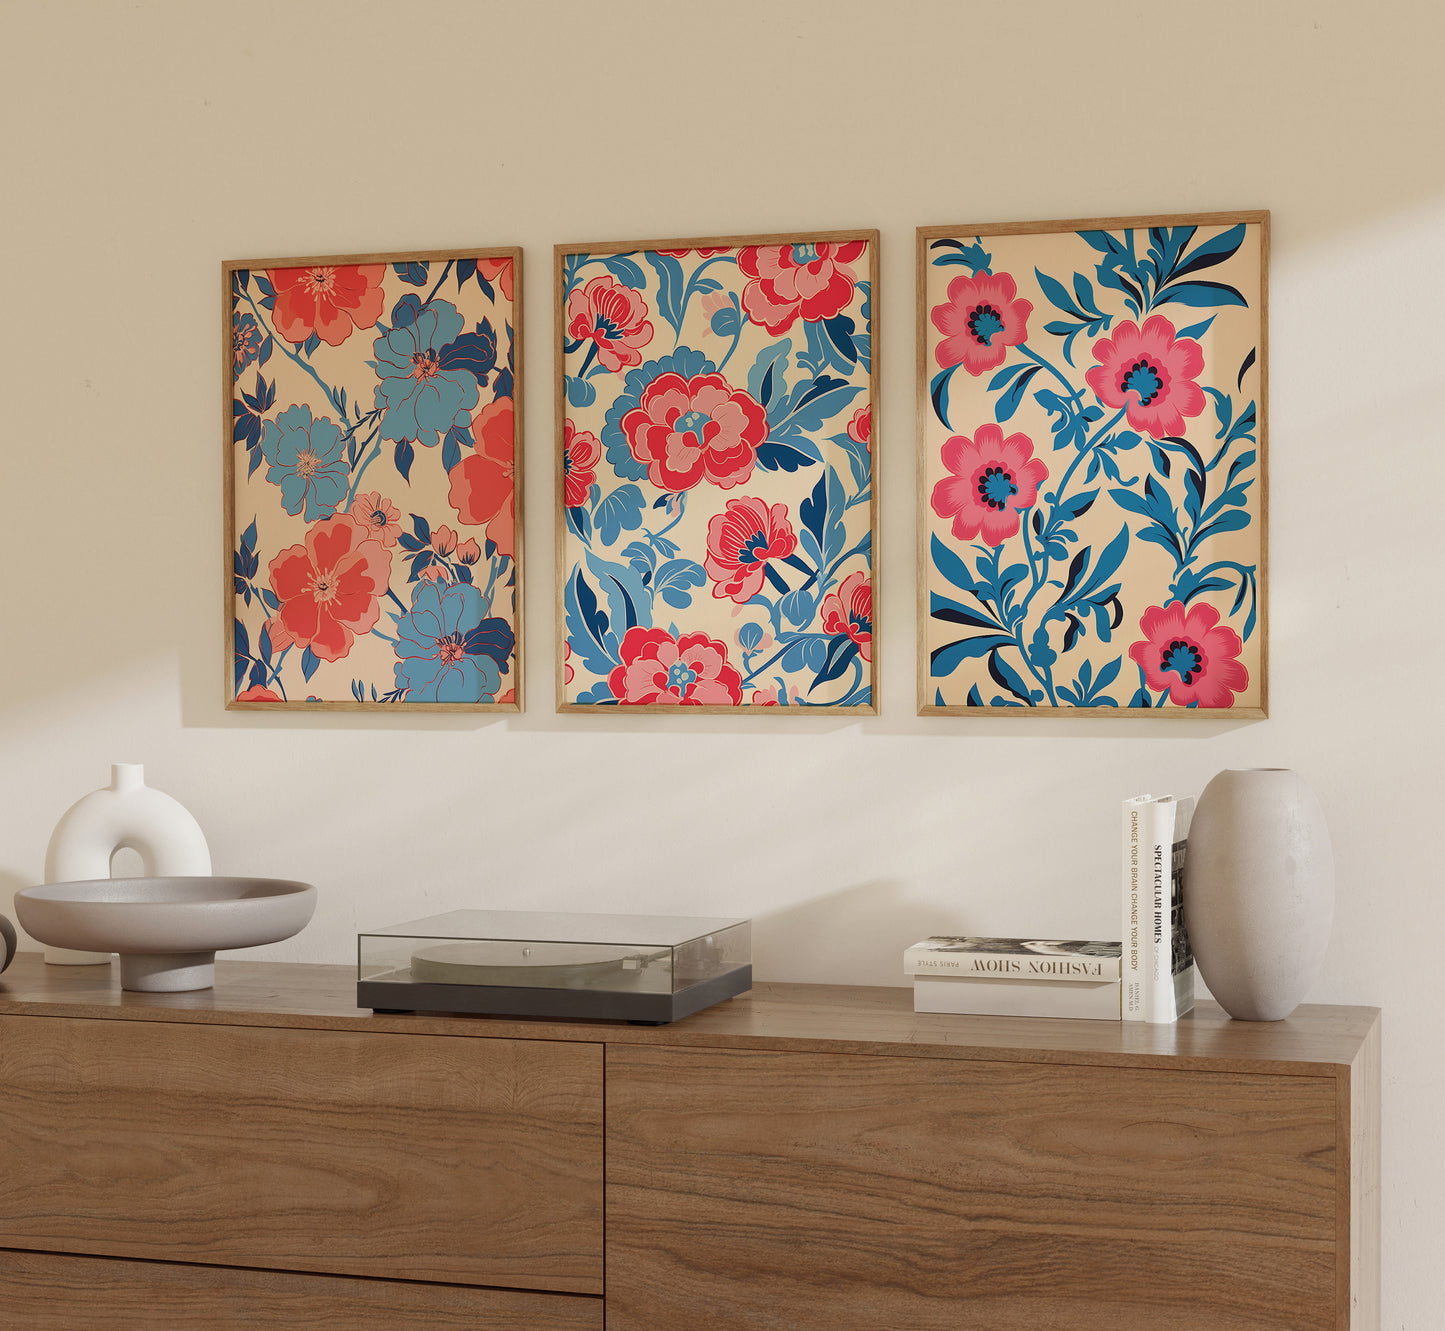 Three vibrant floral paintings on a wall above a wooden sideboard with decorative items.